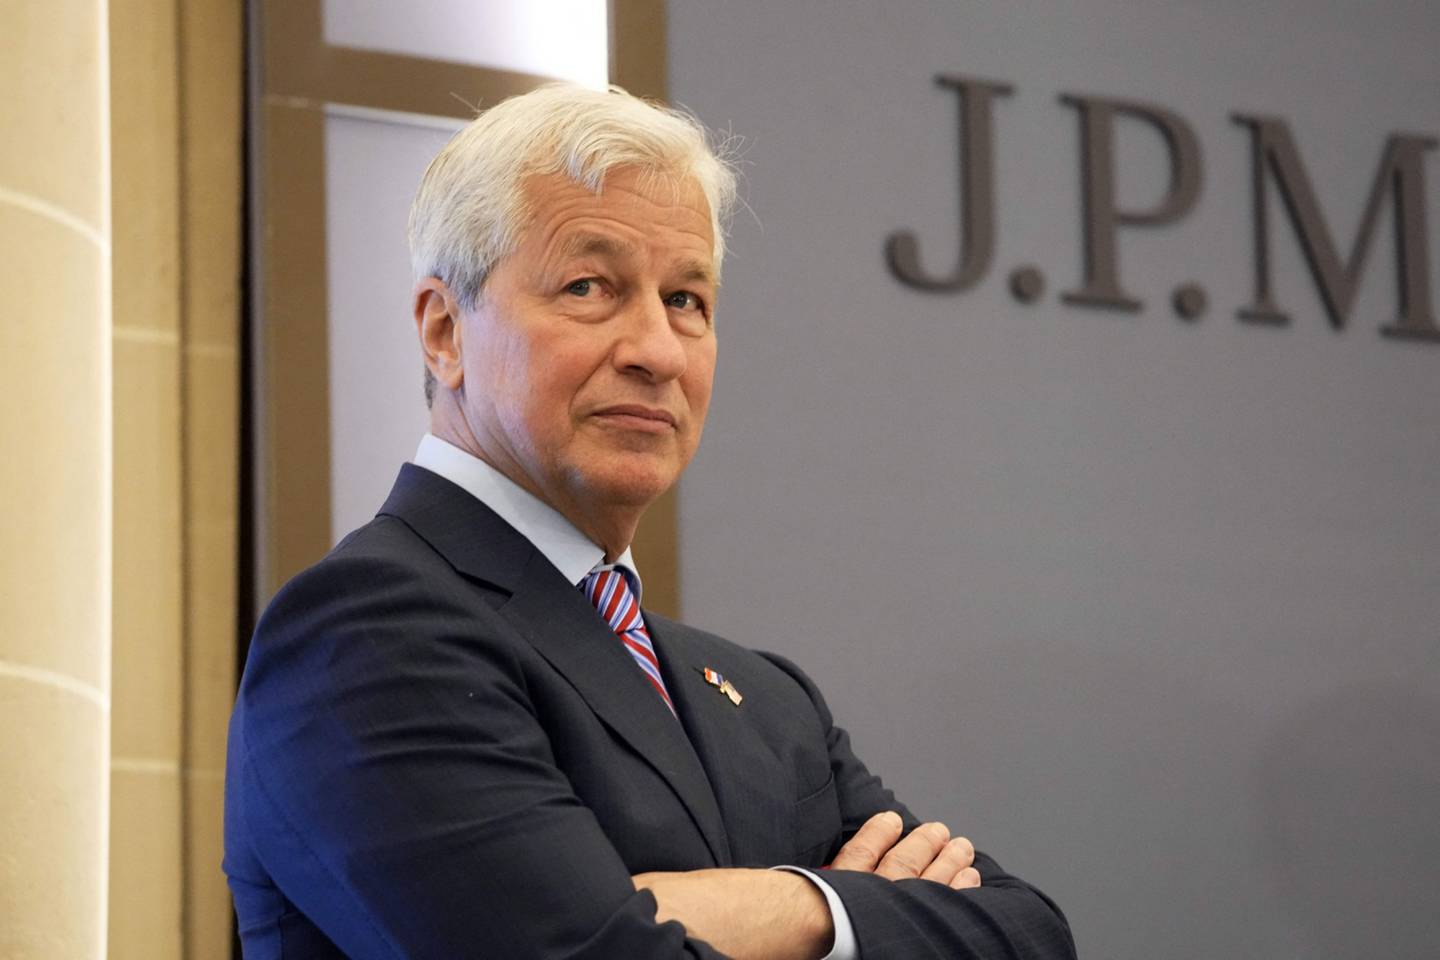 “I do not envy the Fed for what it must do next: The stronger the recovery, the higher the rates that follow,” Dimon wrote in a letter to shareholders.